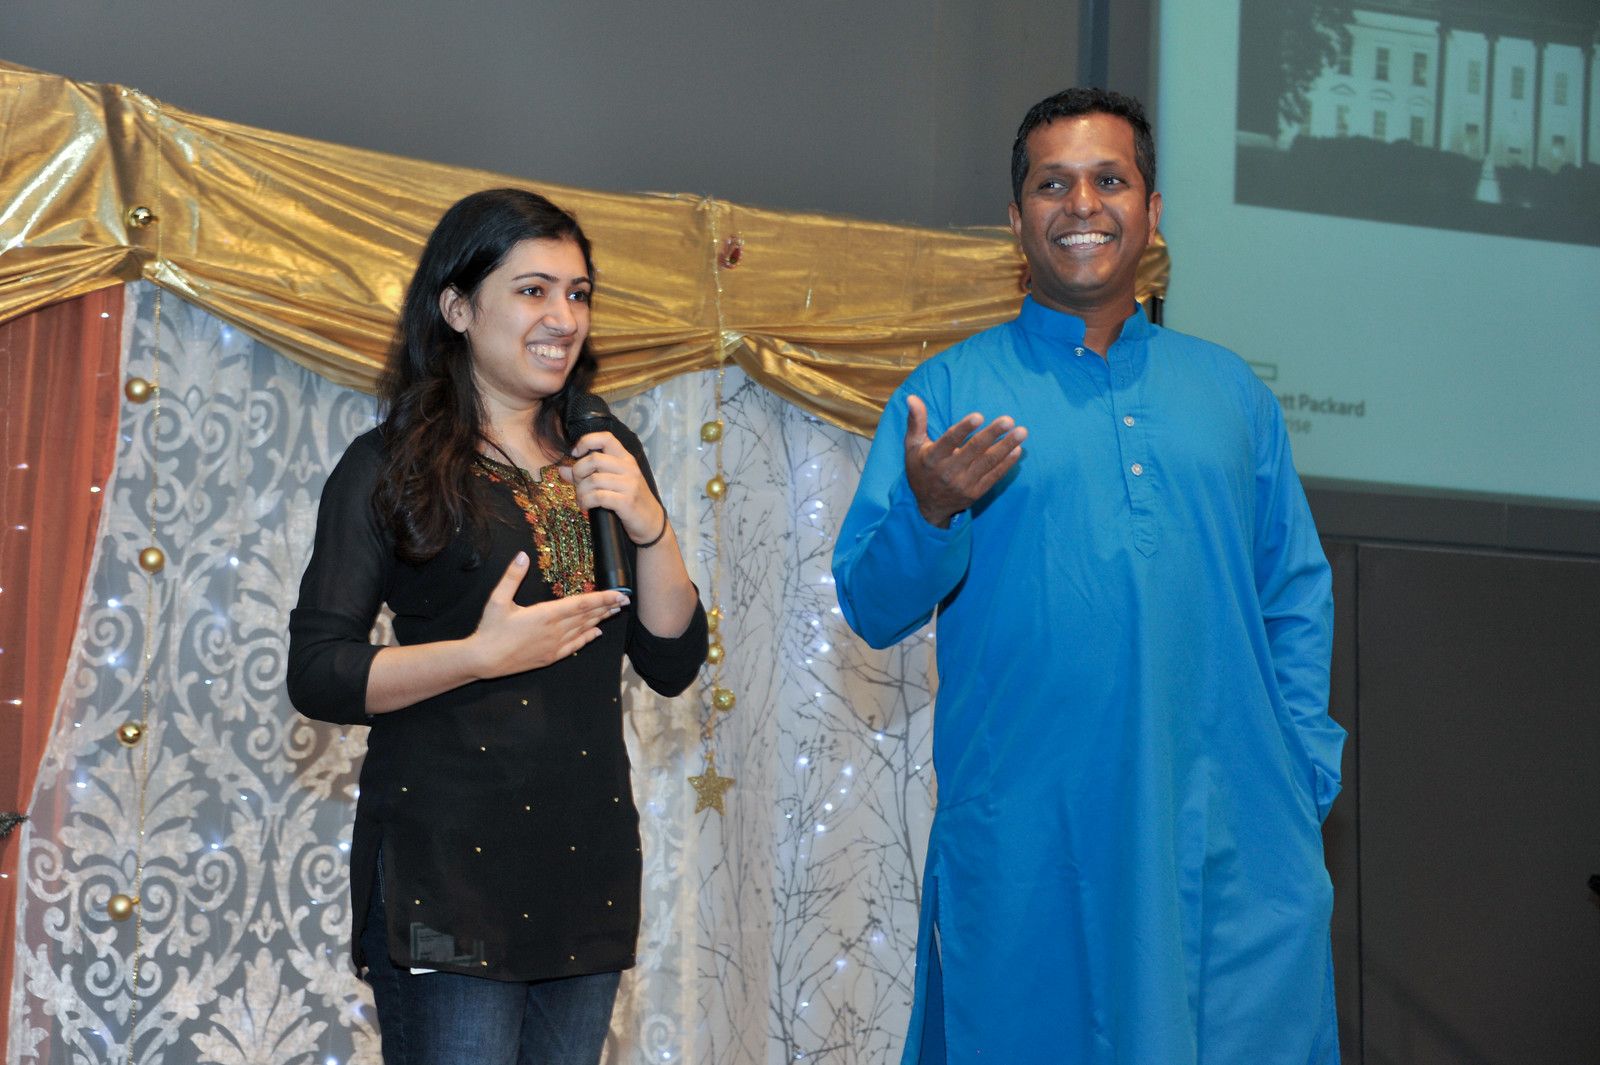 Diwali trivia - employees were quizzed on everything from Diwali culture to HPE history